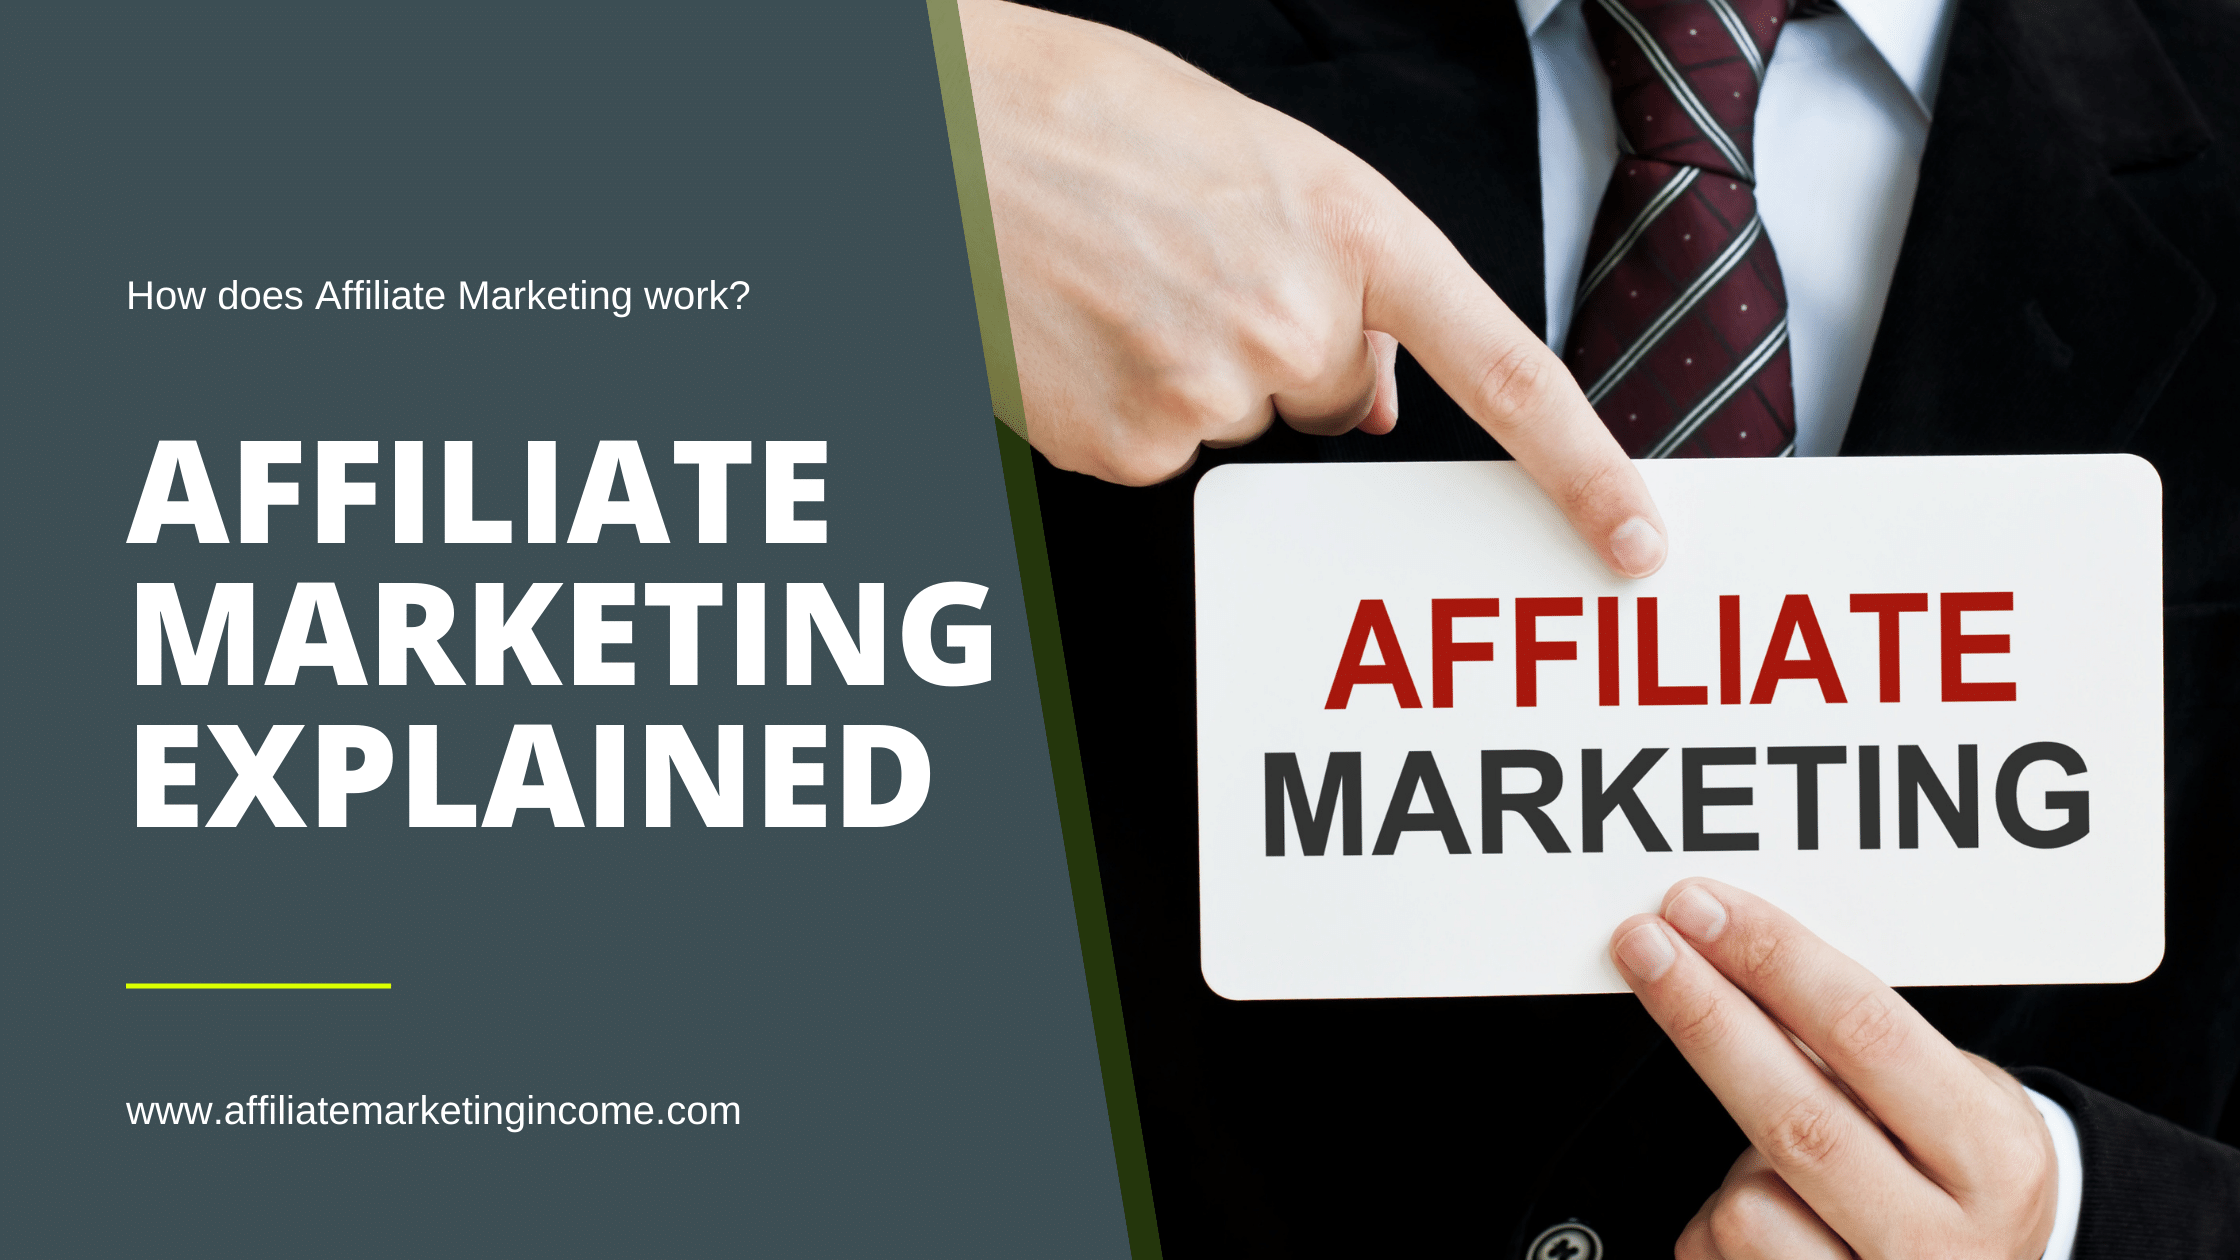 How does affiliate Marketing work?